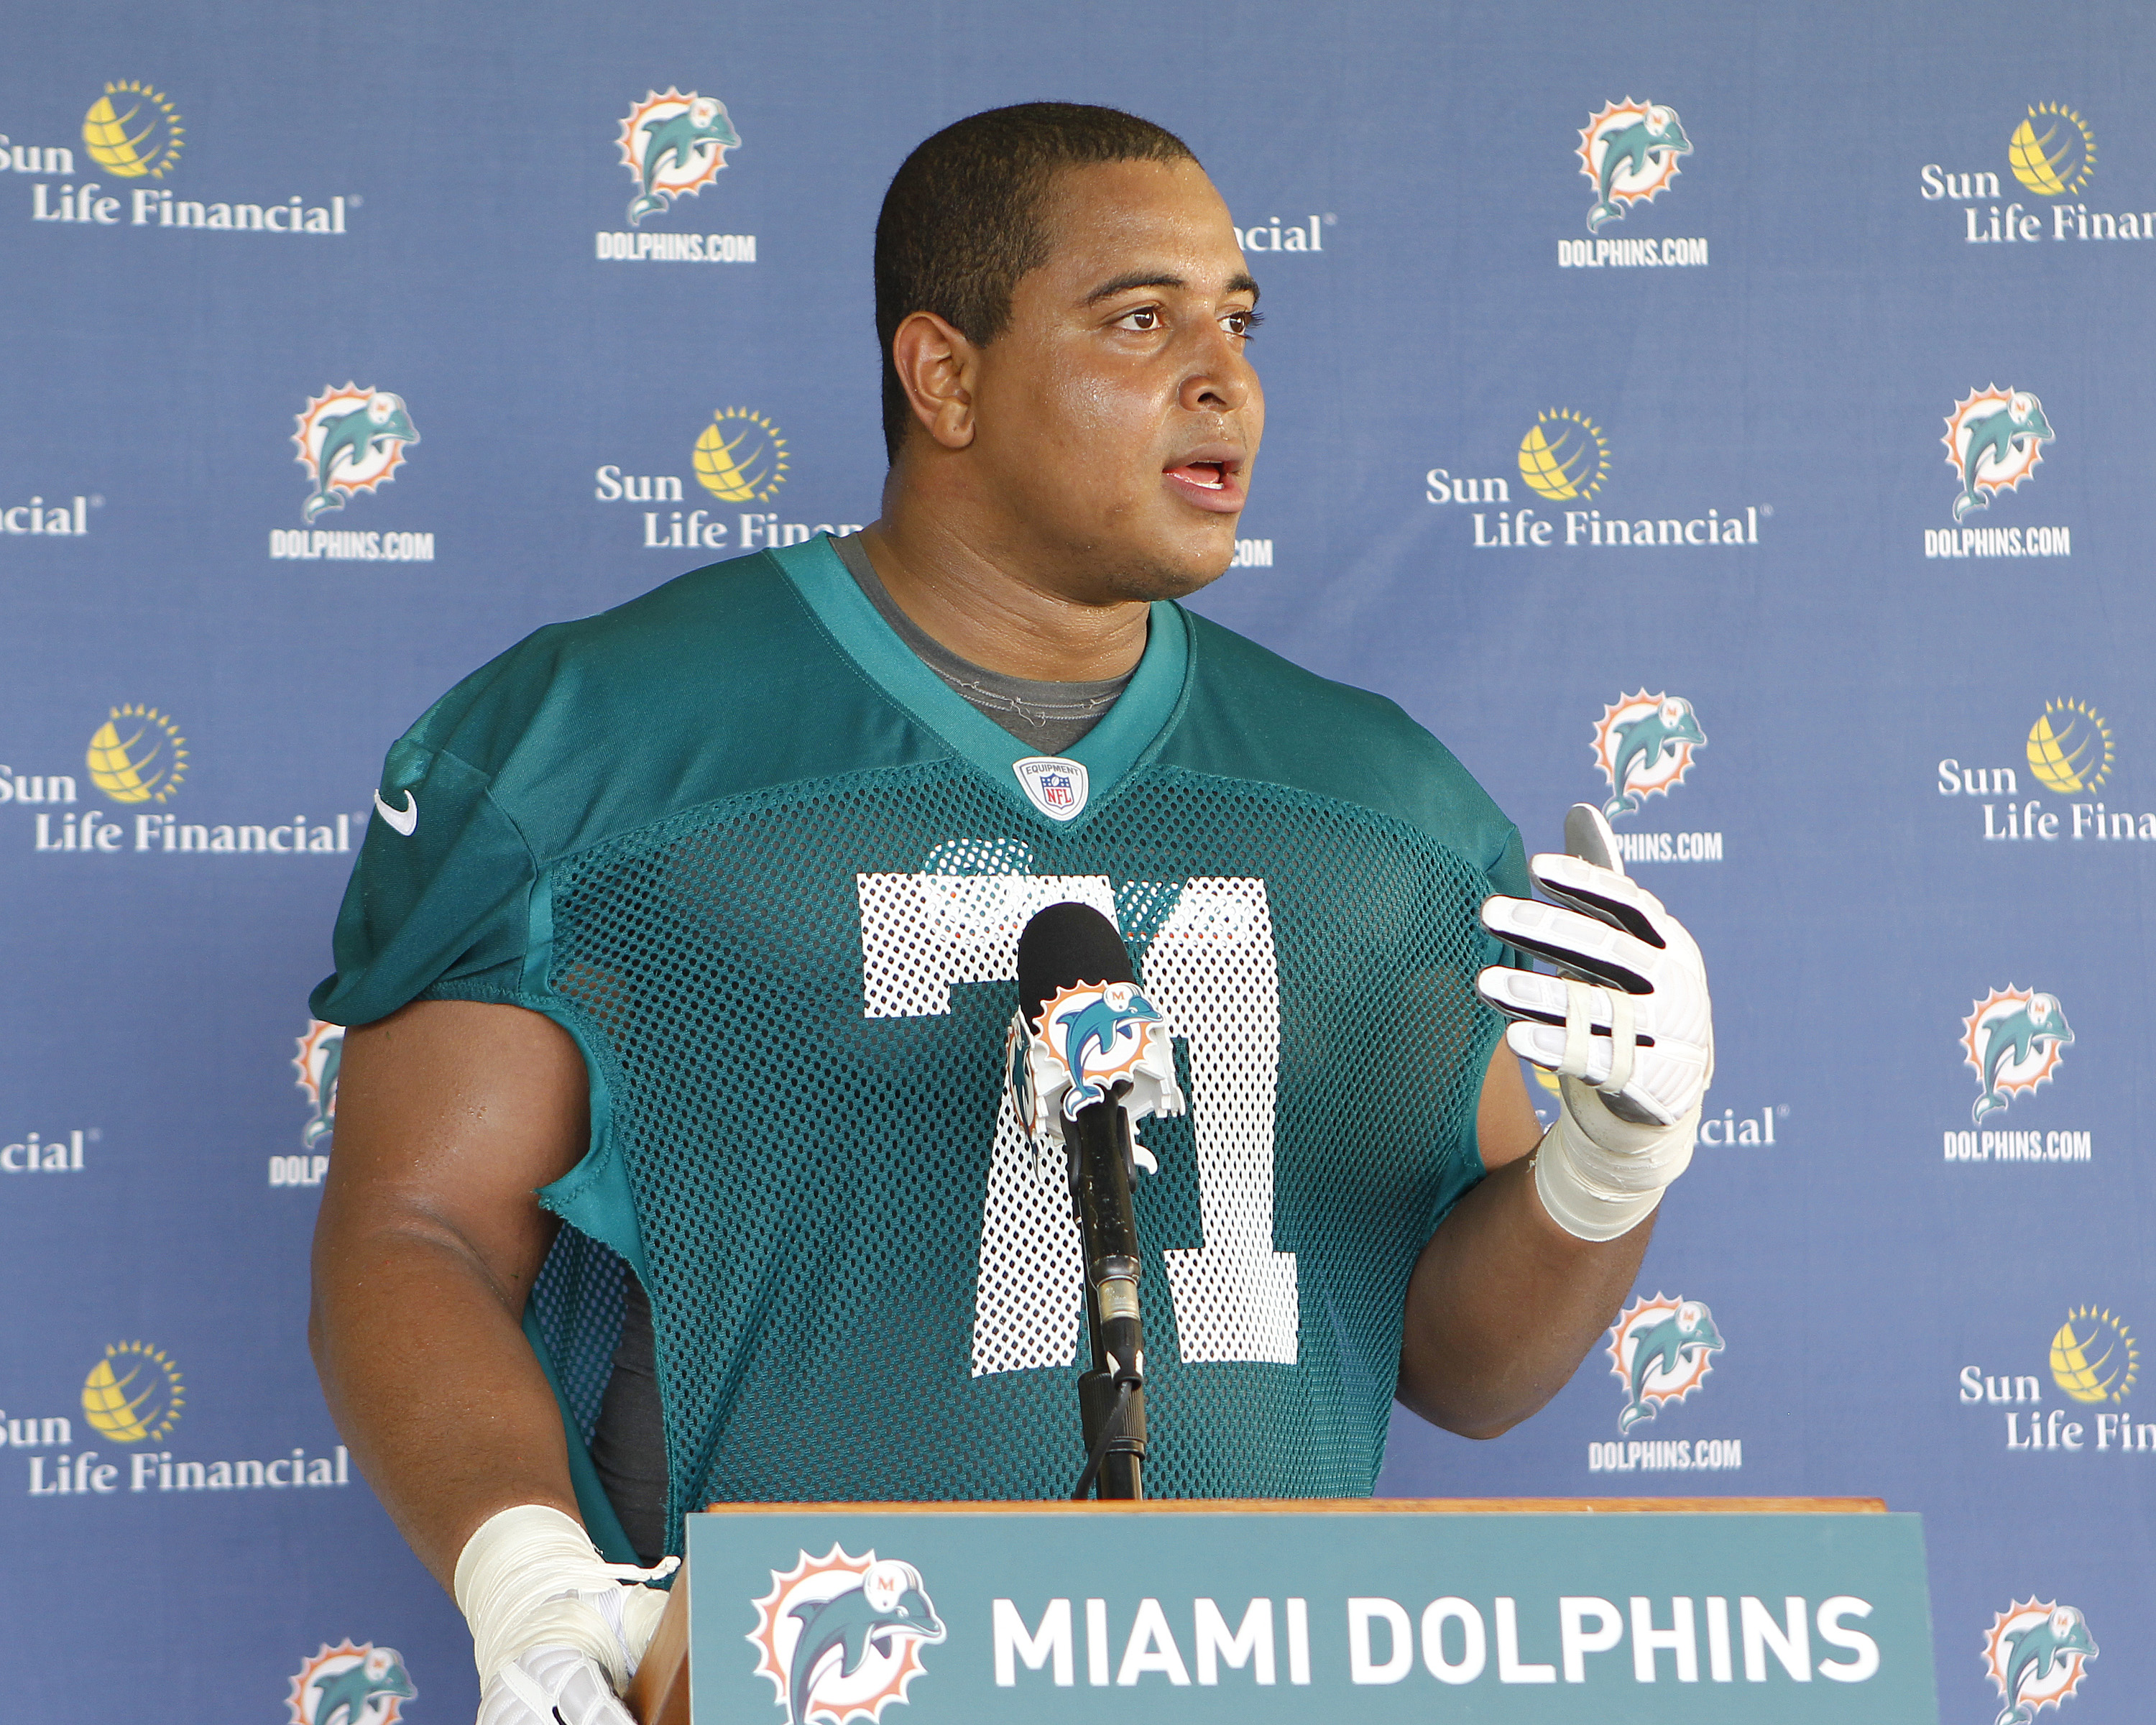 DAVIE, FL - MAY 4: Jonathan Martin #71 of the Miami Dolphins talks ot the media after the rookie minicamp on May 4, 2012 at the Miami Dolphins training facility in Davie, Florida. (Photo by Joel Auerbach/Getty Images)